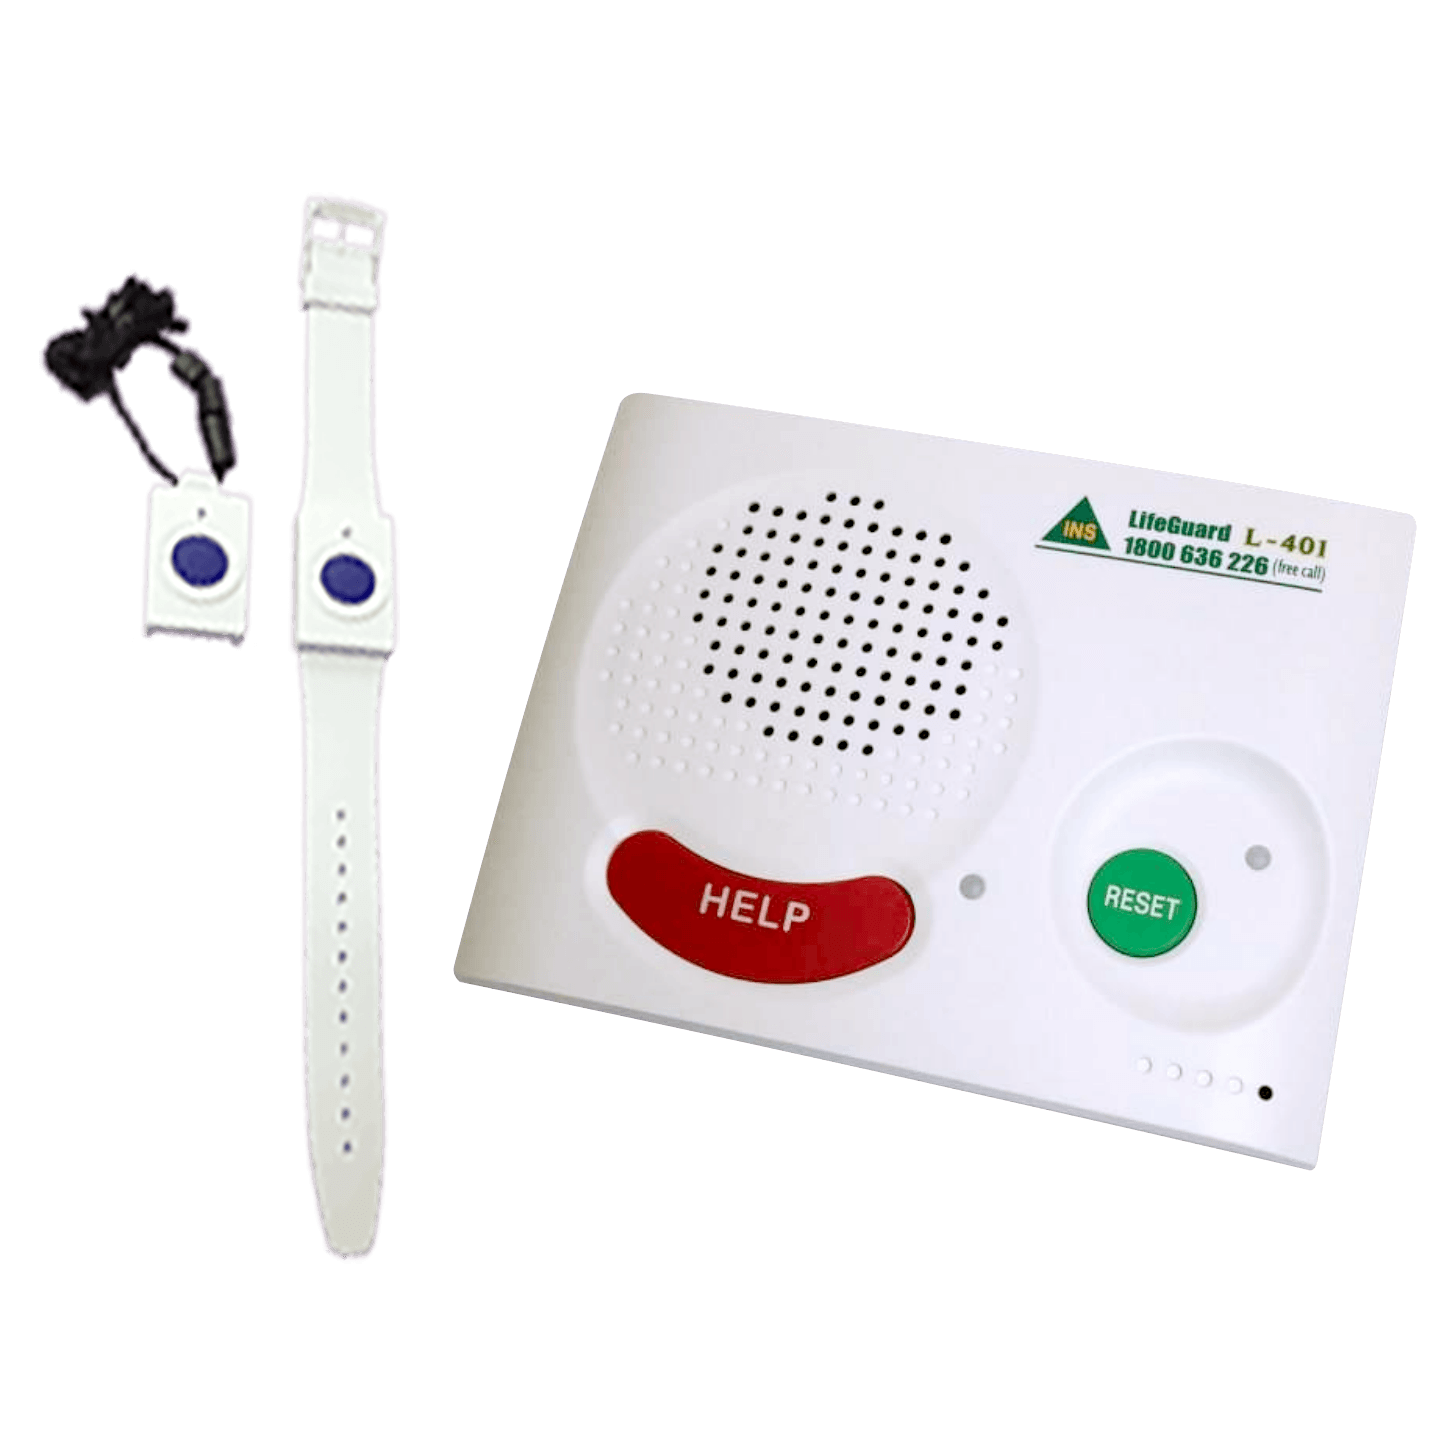 LifeGuard L-401 personal alarm for your own home